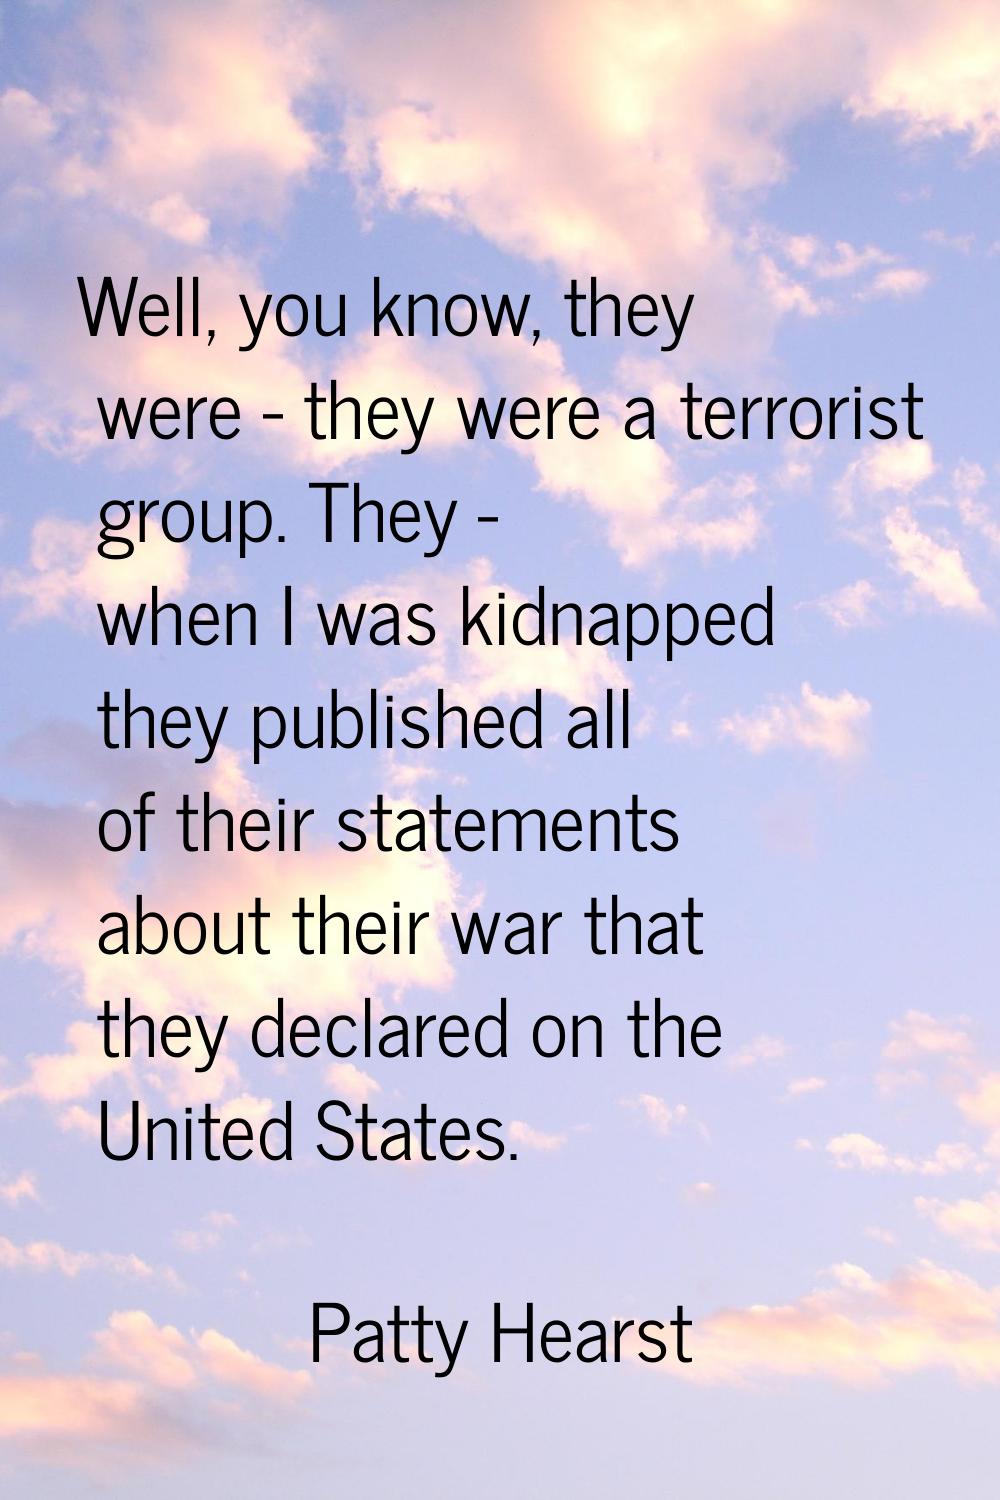 Well, you know, they were - they were a terrorist group. They - when I was kidnapped they published